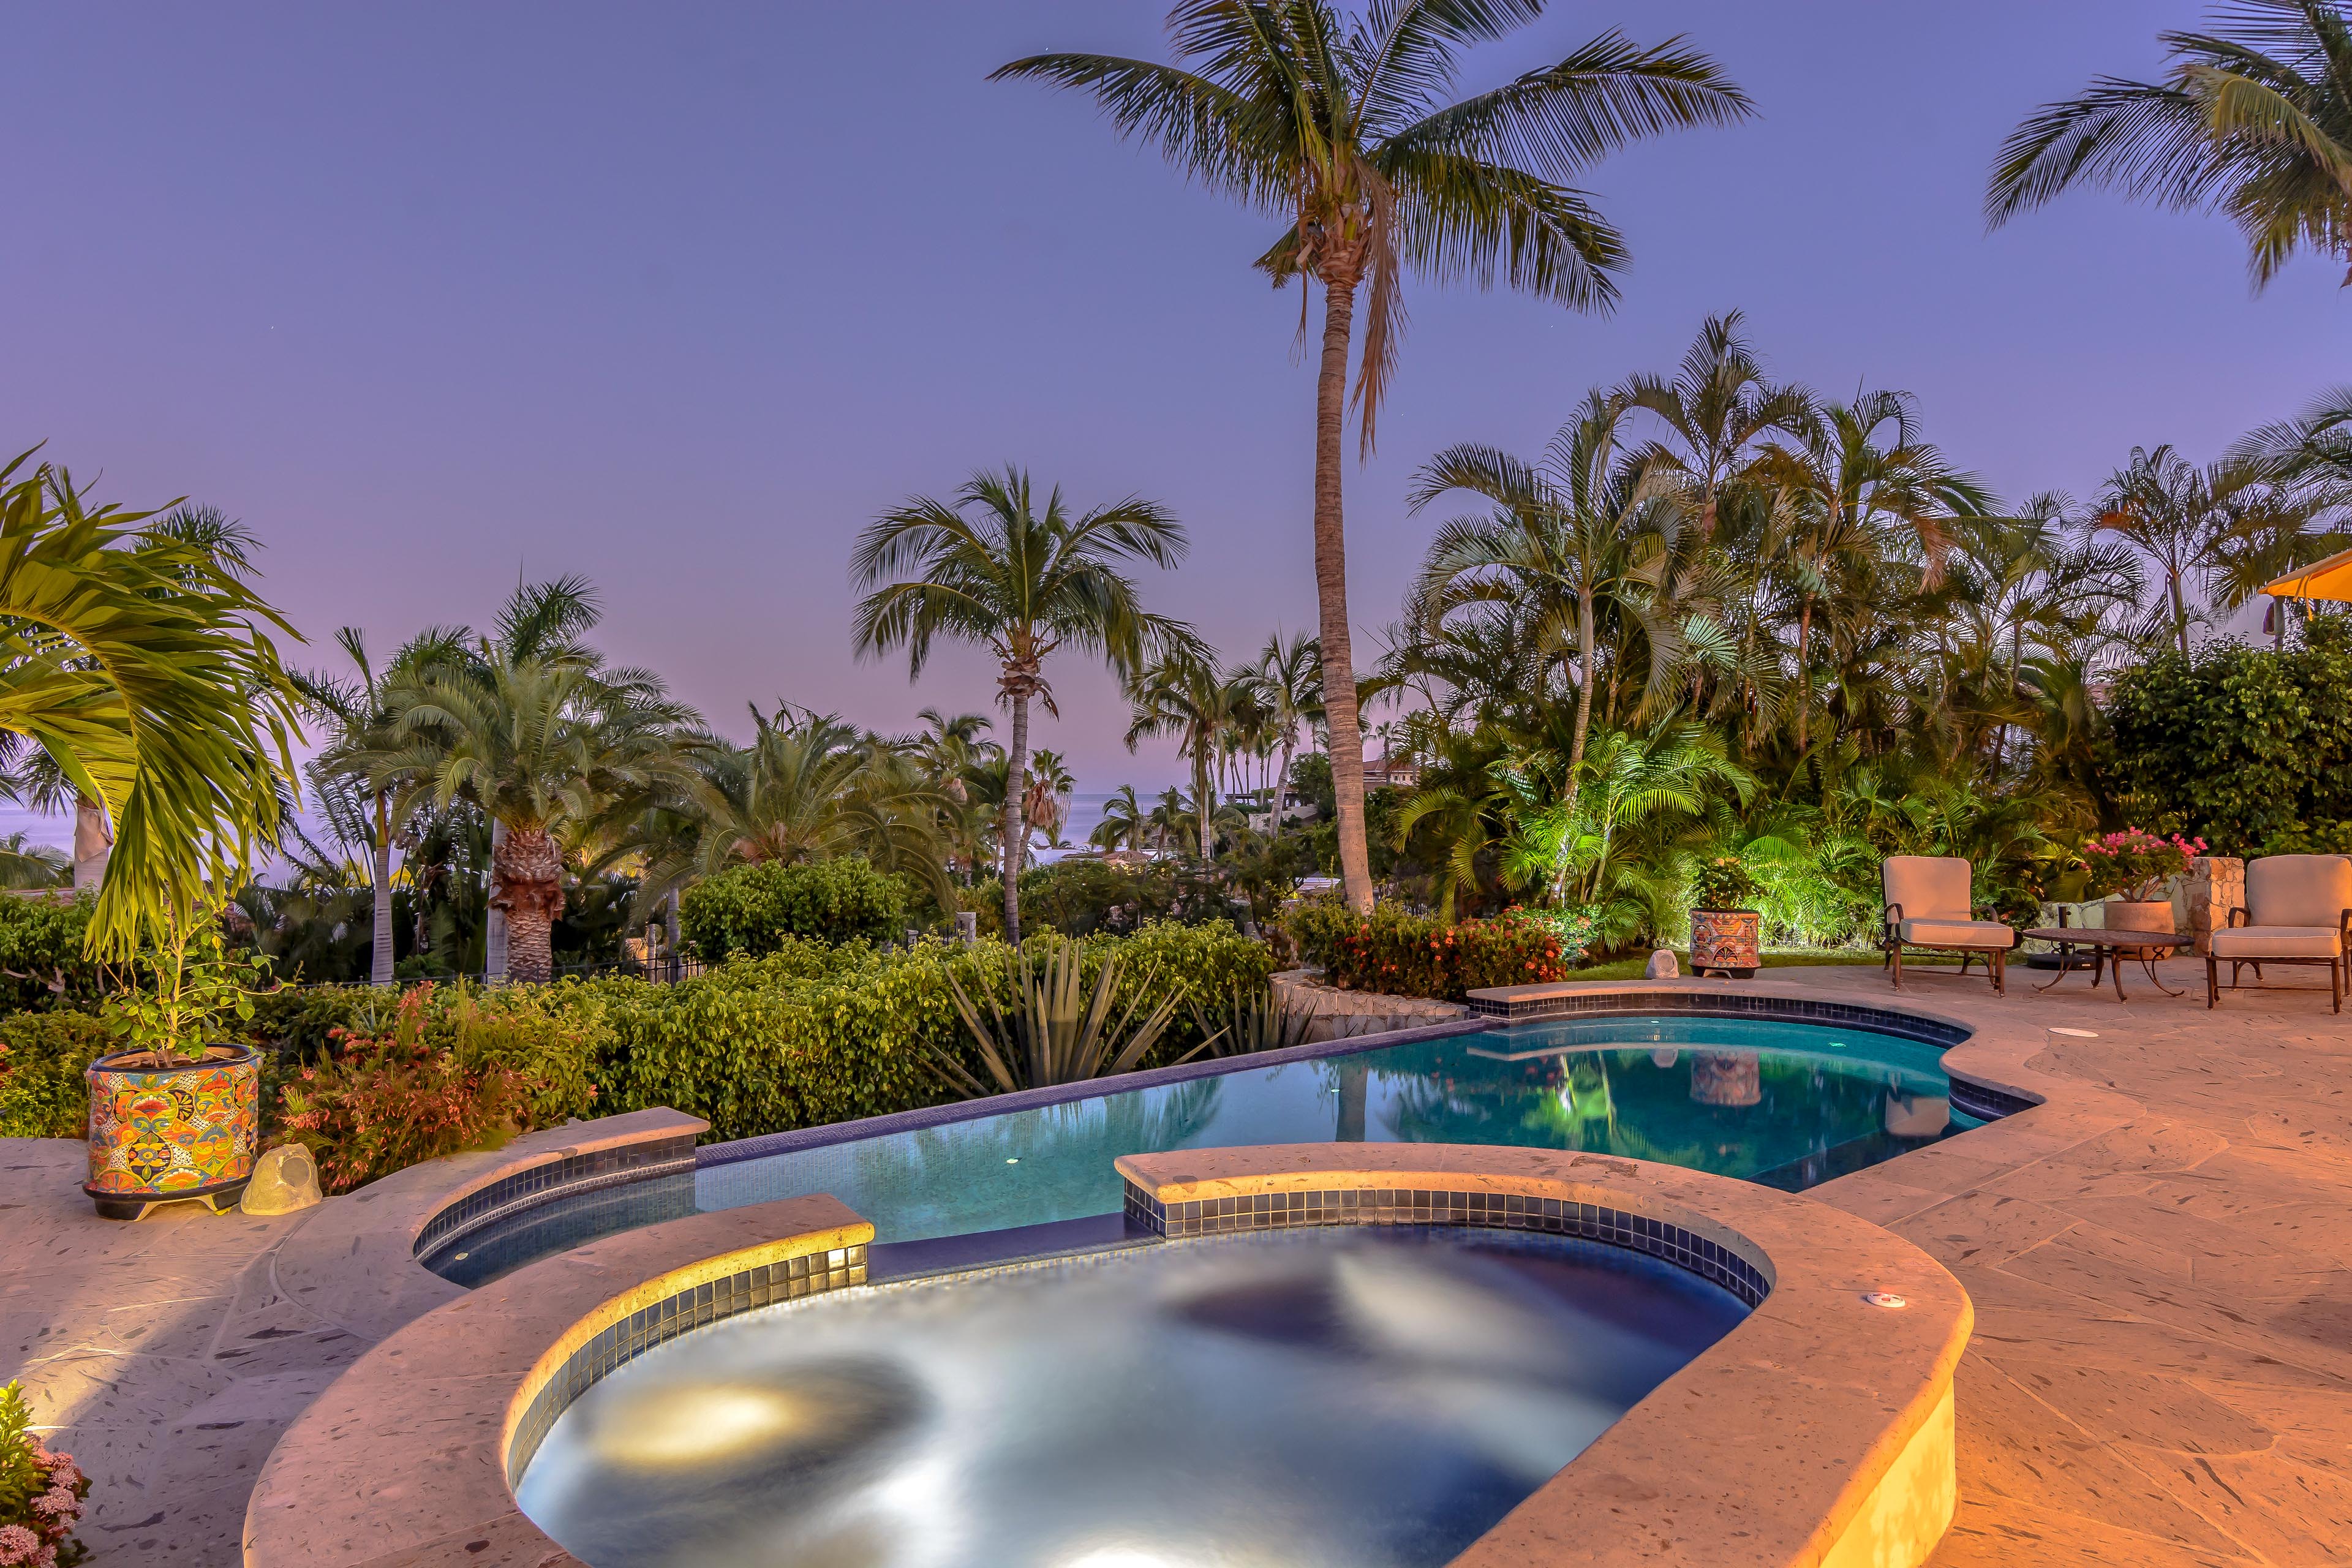 Pool and Jacuzzi